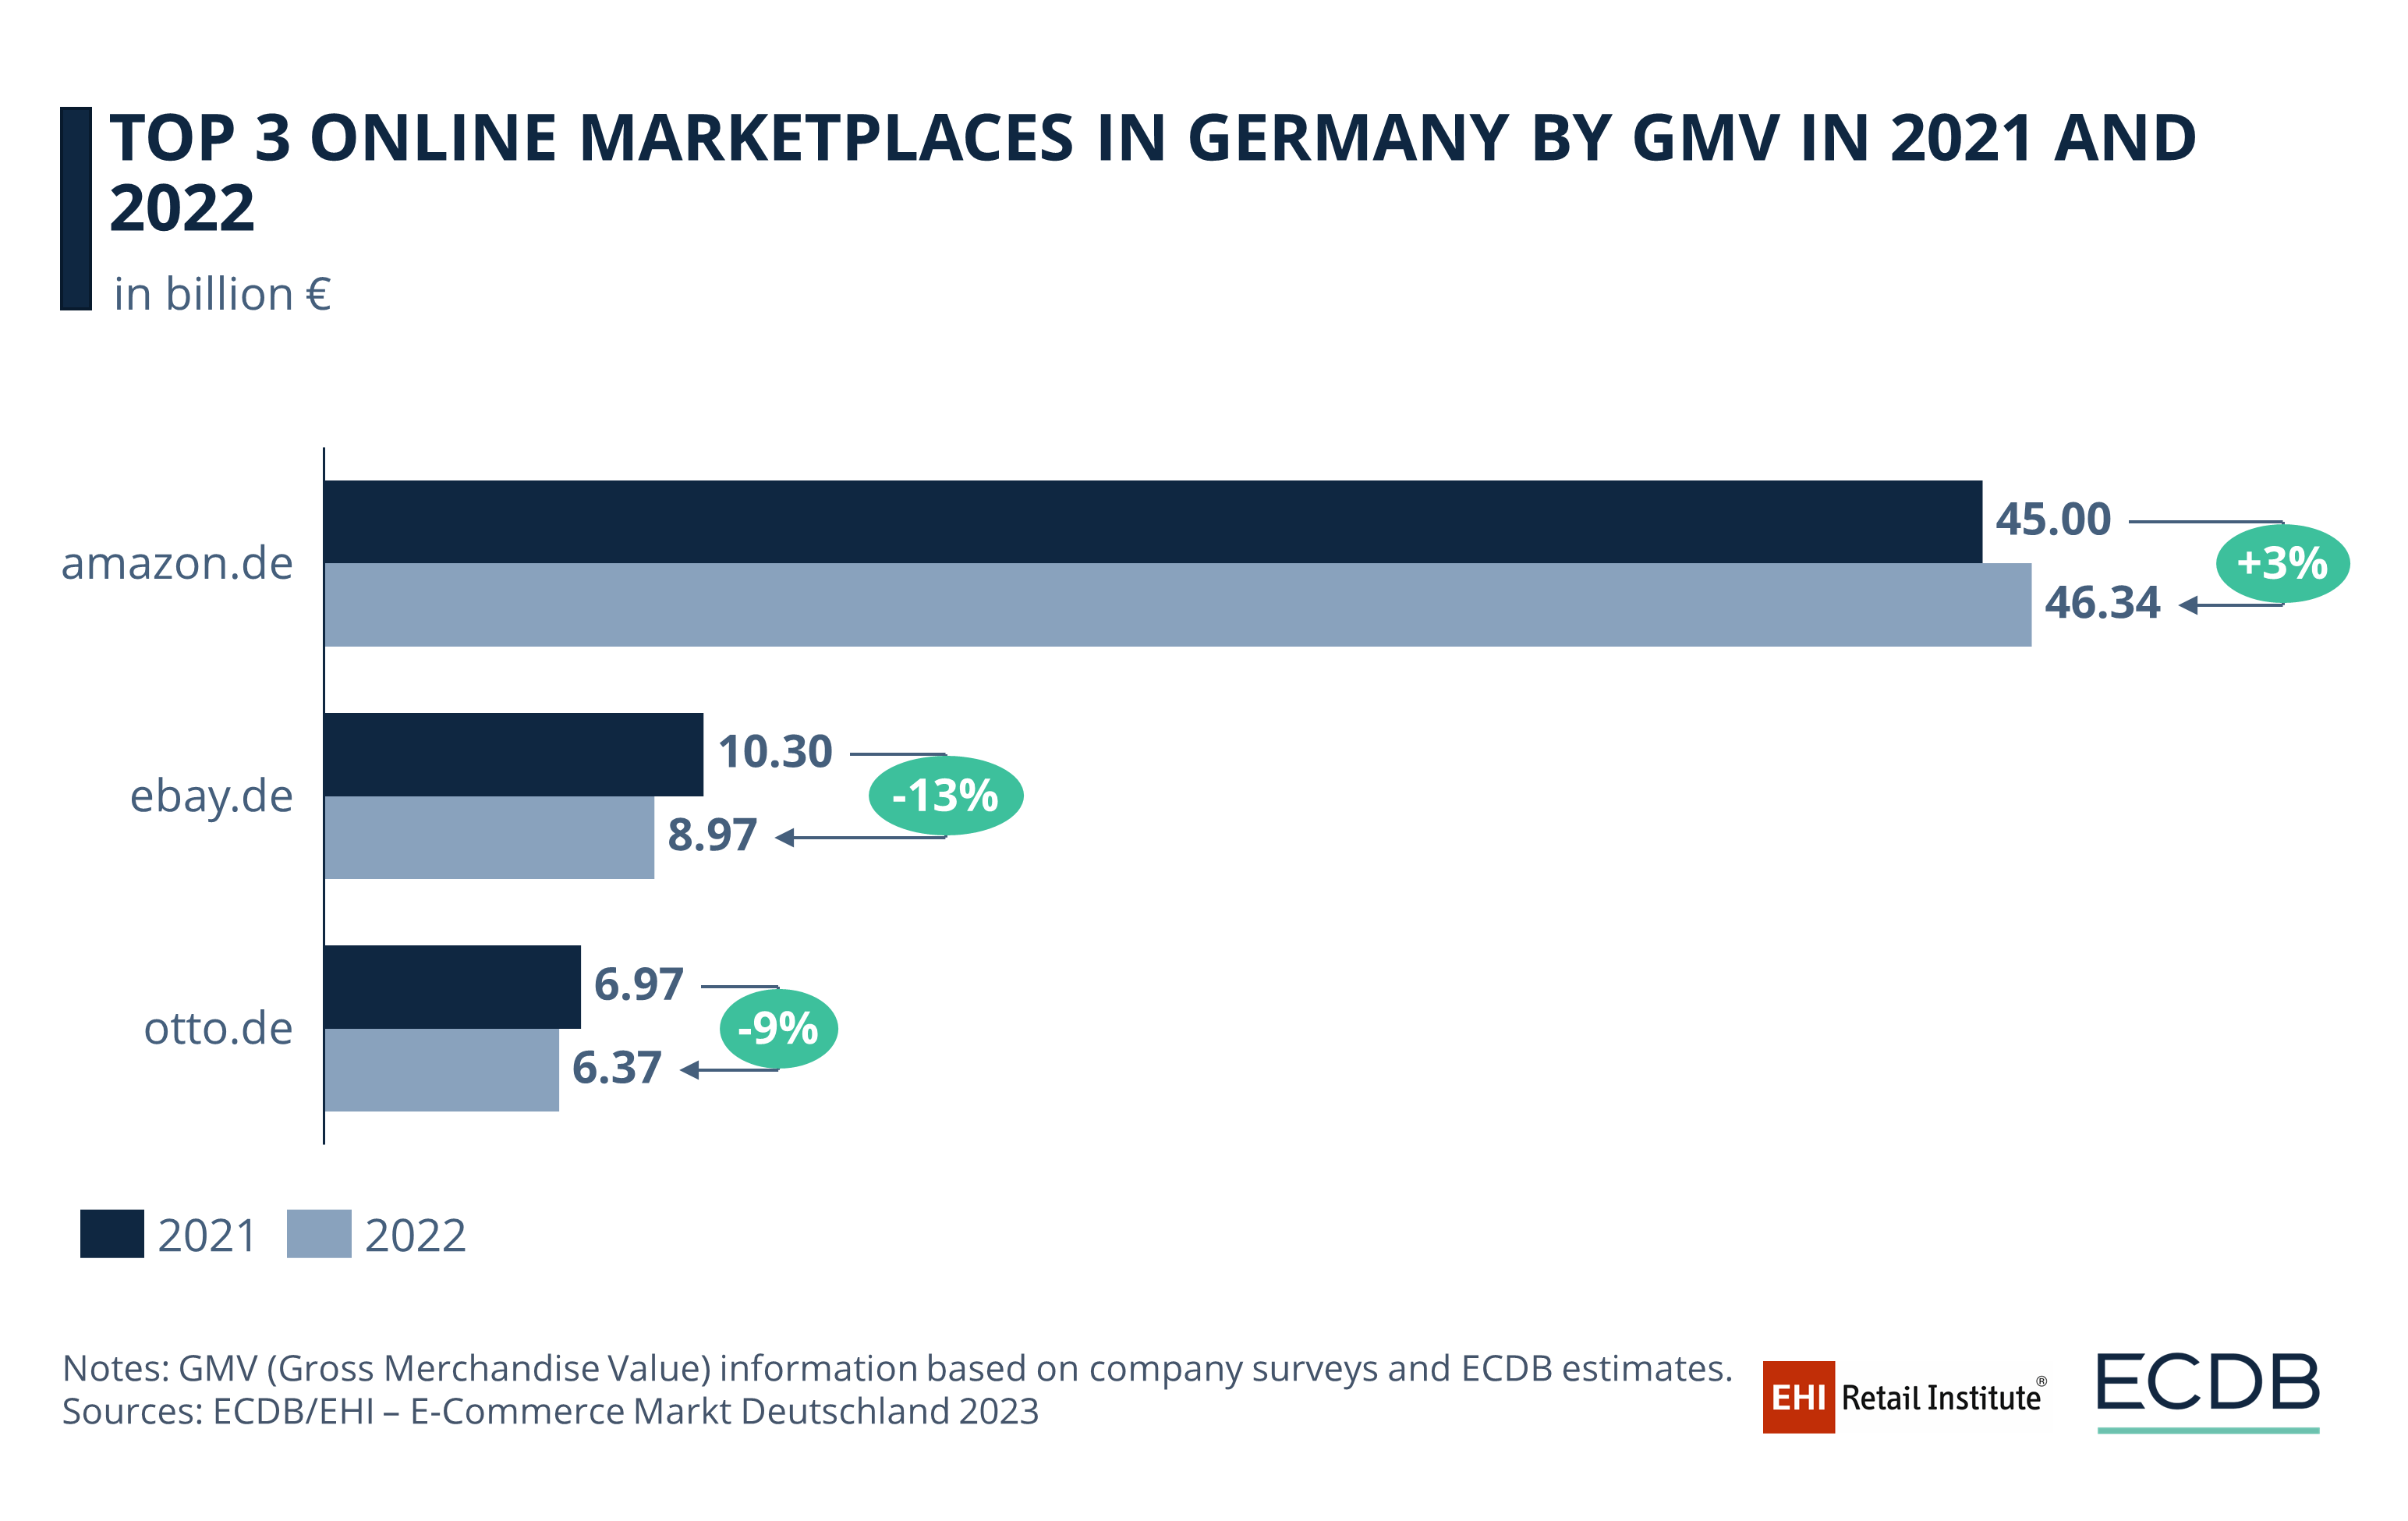 Top 3 Marketplaces in Germany, 2021-2022 and Growth